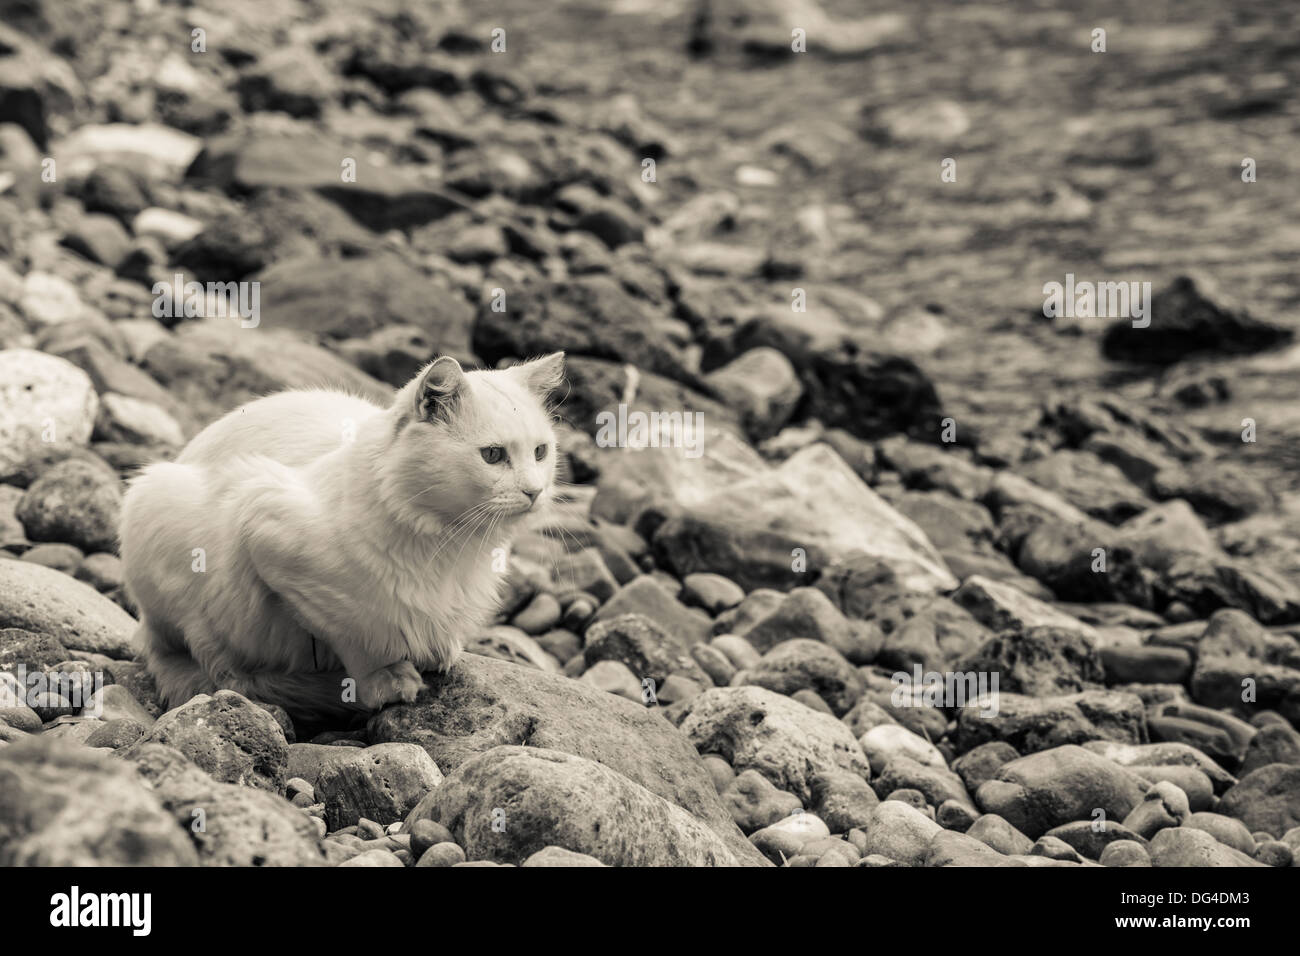 white cat cat waiting for food near the sea in monochrome Stock Photo